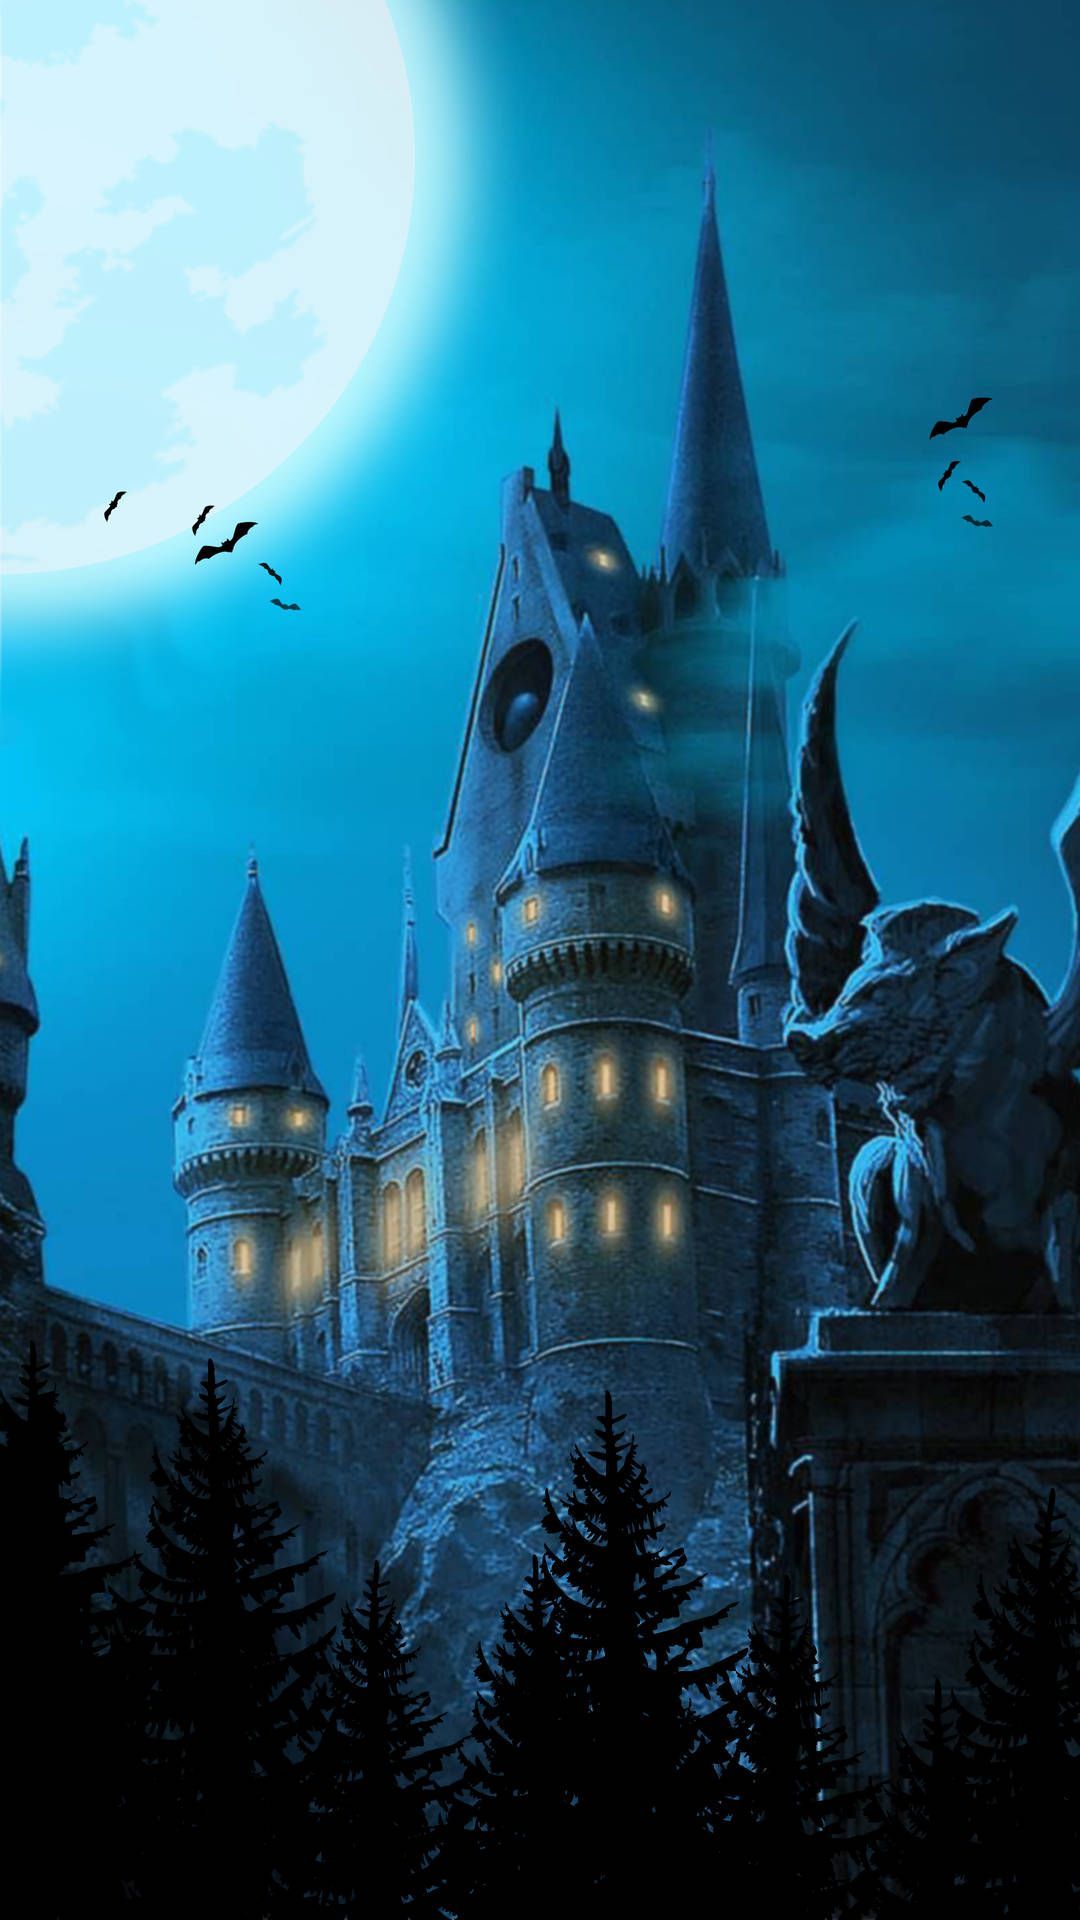 Hogwarts Castle iPhone Wallpaper with high-resolution 1080x1920 pixel. You can use this wallpaper for your iPhone 5, 6, 7, 8, X, XS, XR backgrounds, Mobile Screensaver, or iPad Lock Screen - Castle